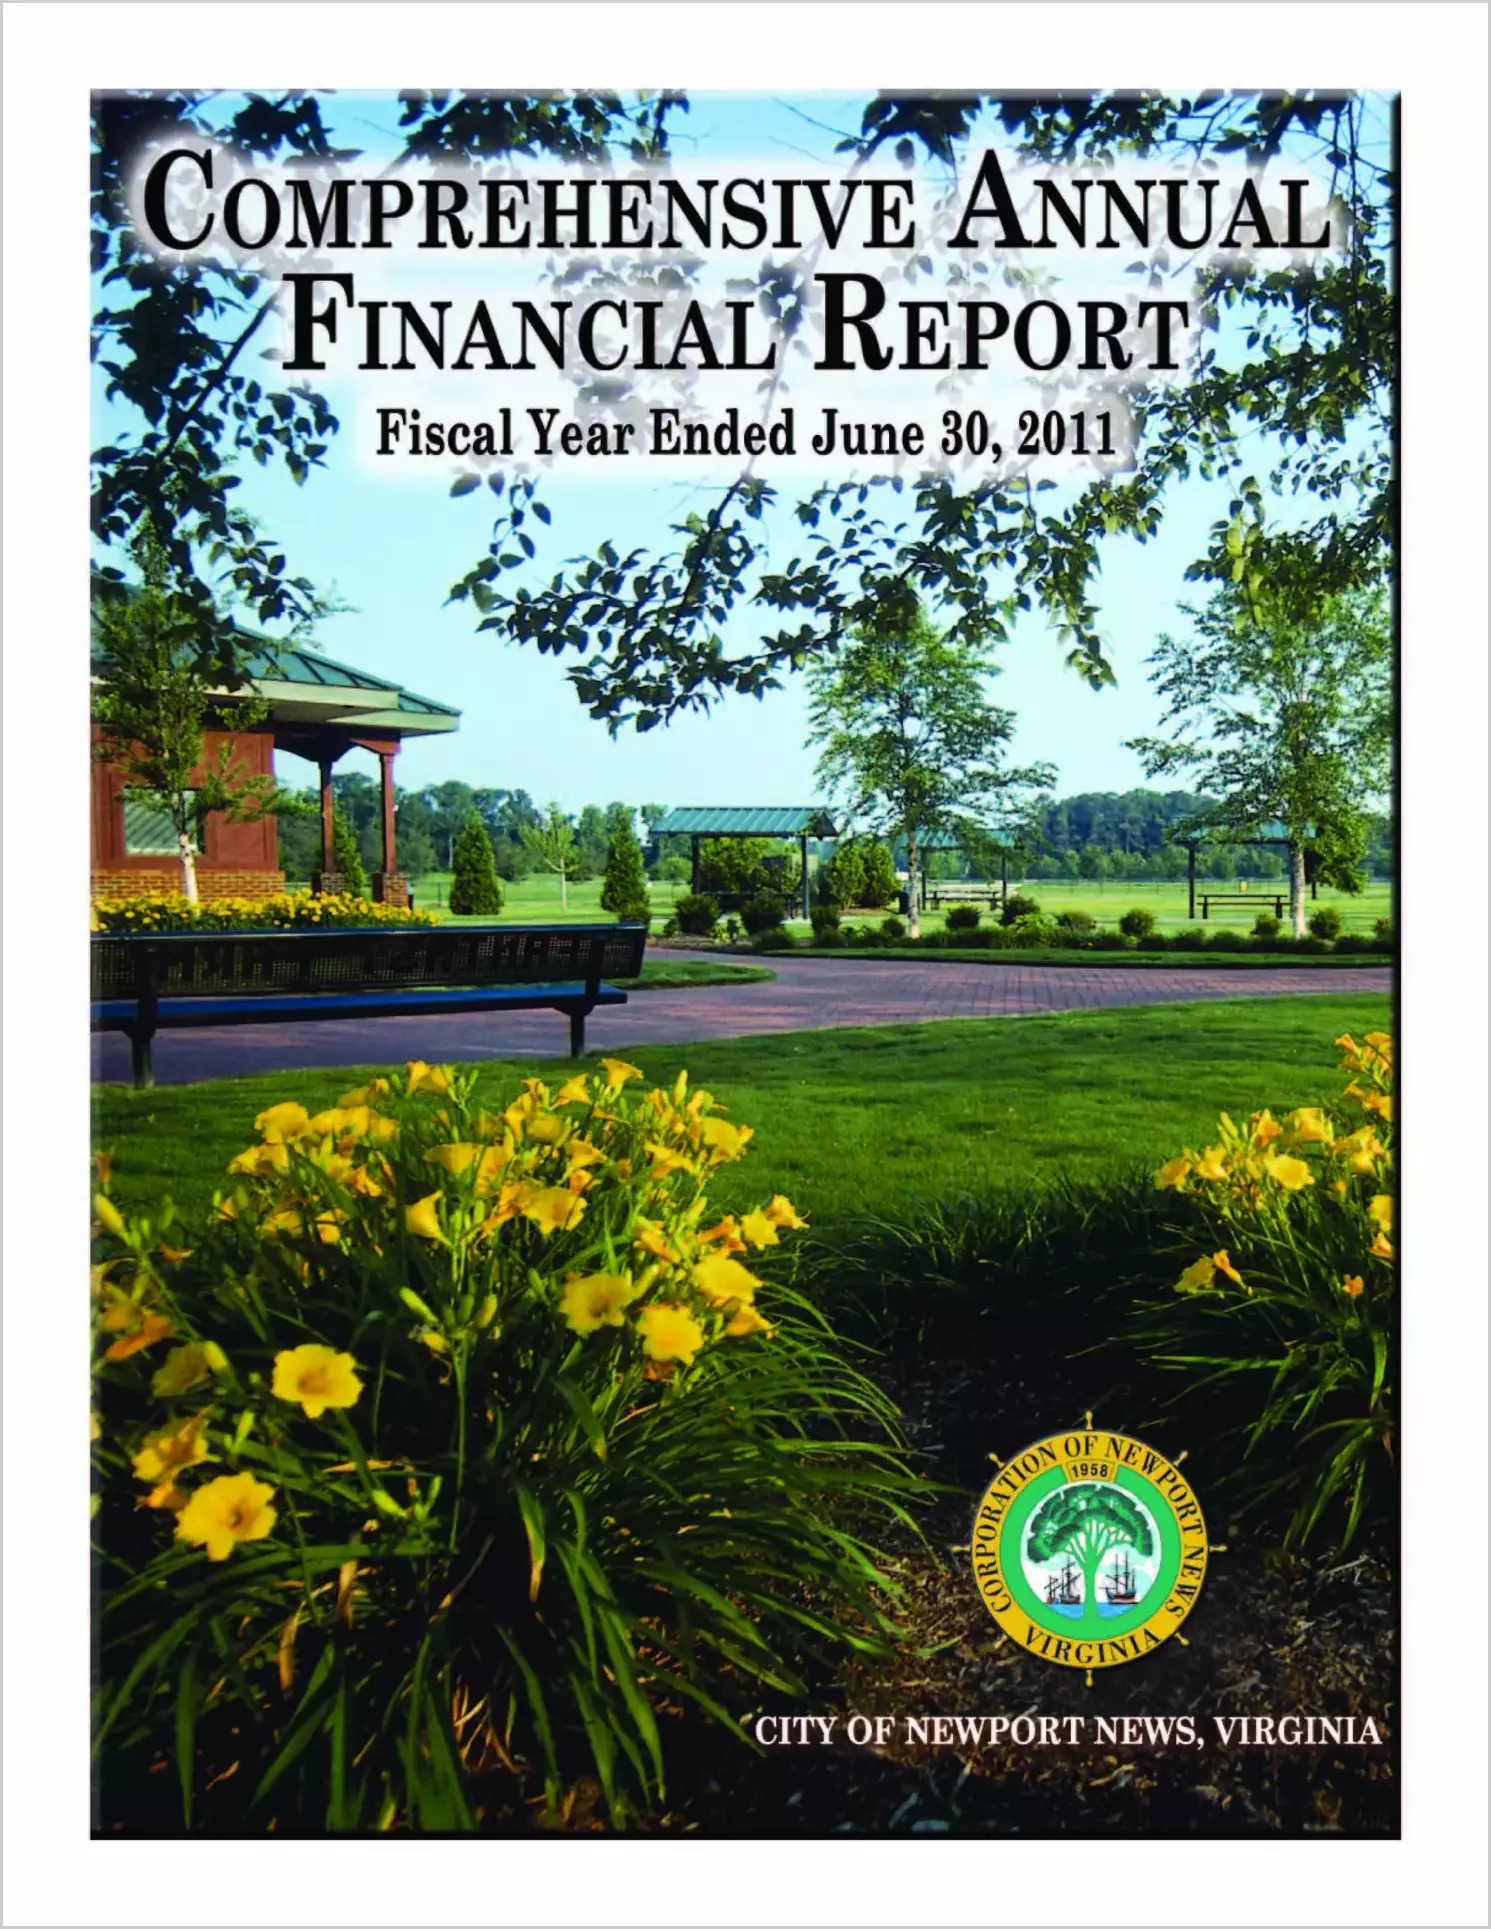 2011 Annual Financial Report for City of Newport News